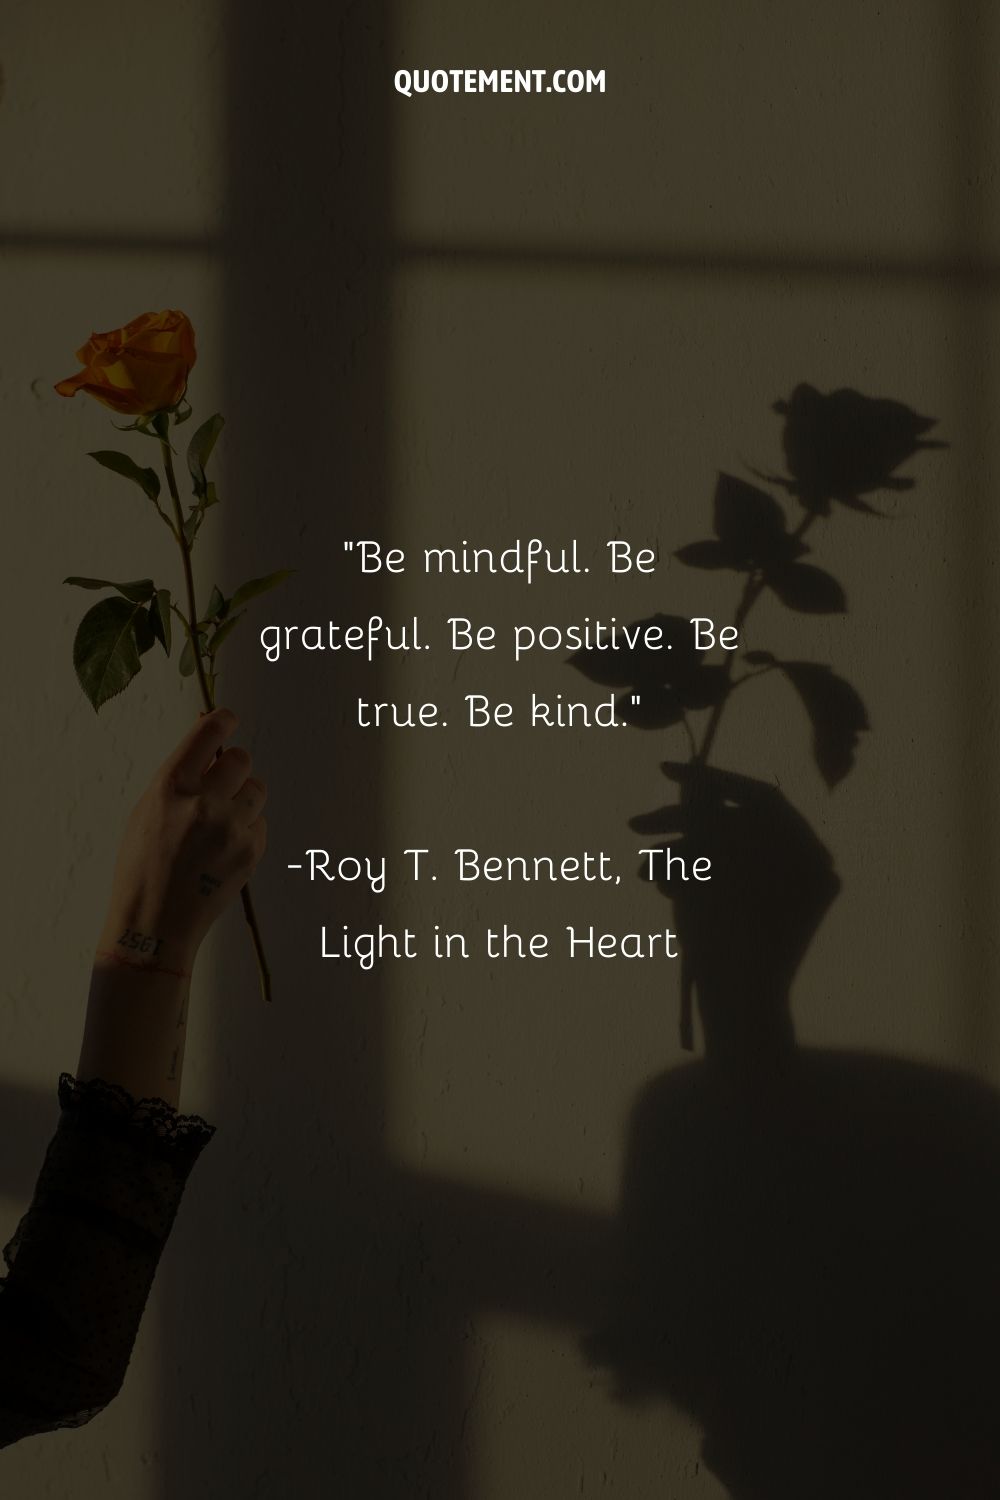 Be mindful. Be grateful. Be positive. Be true. Be kind.